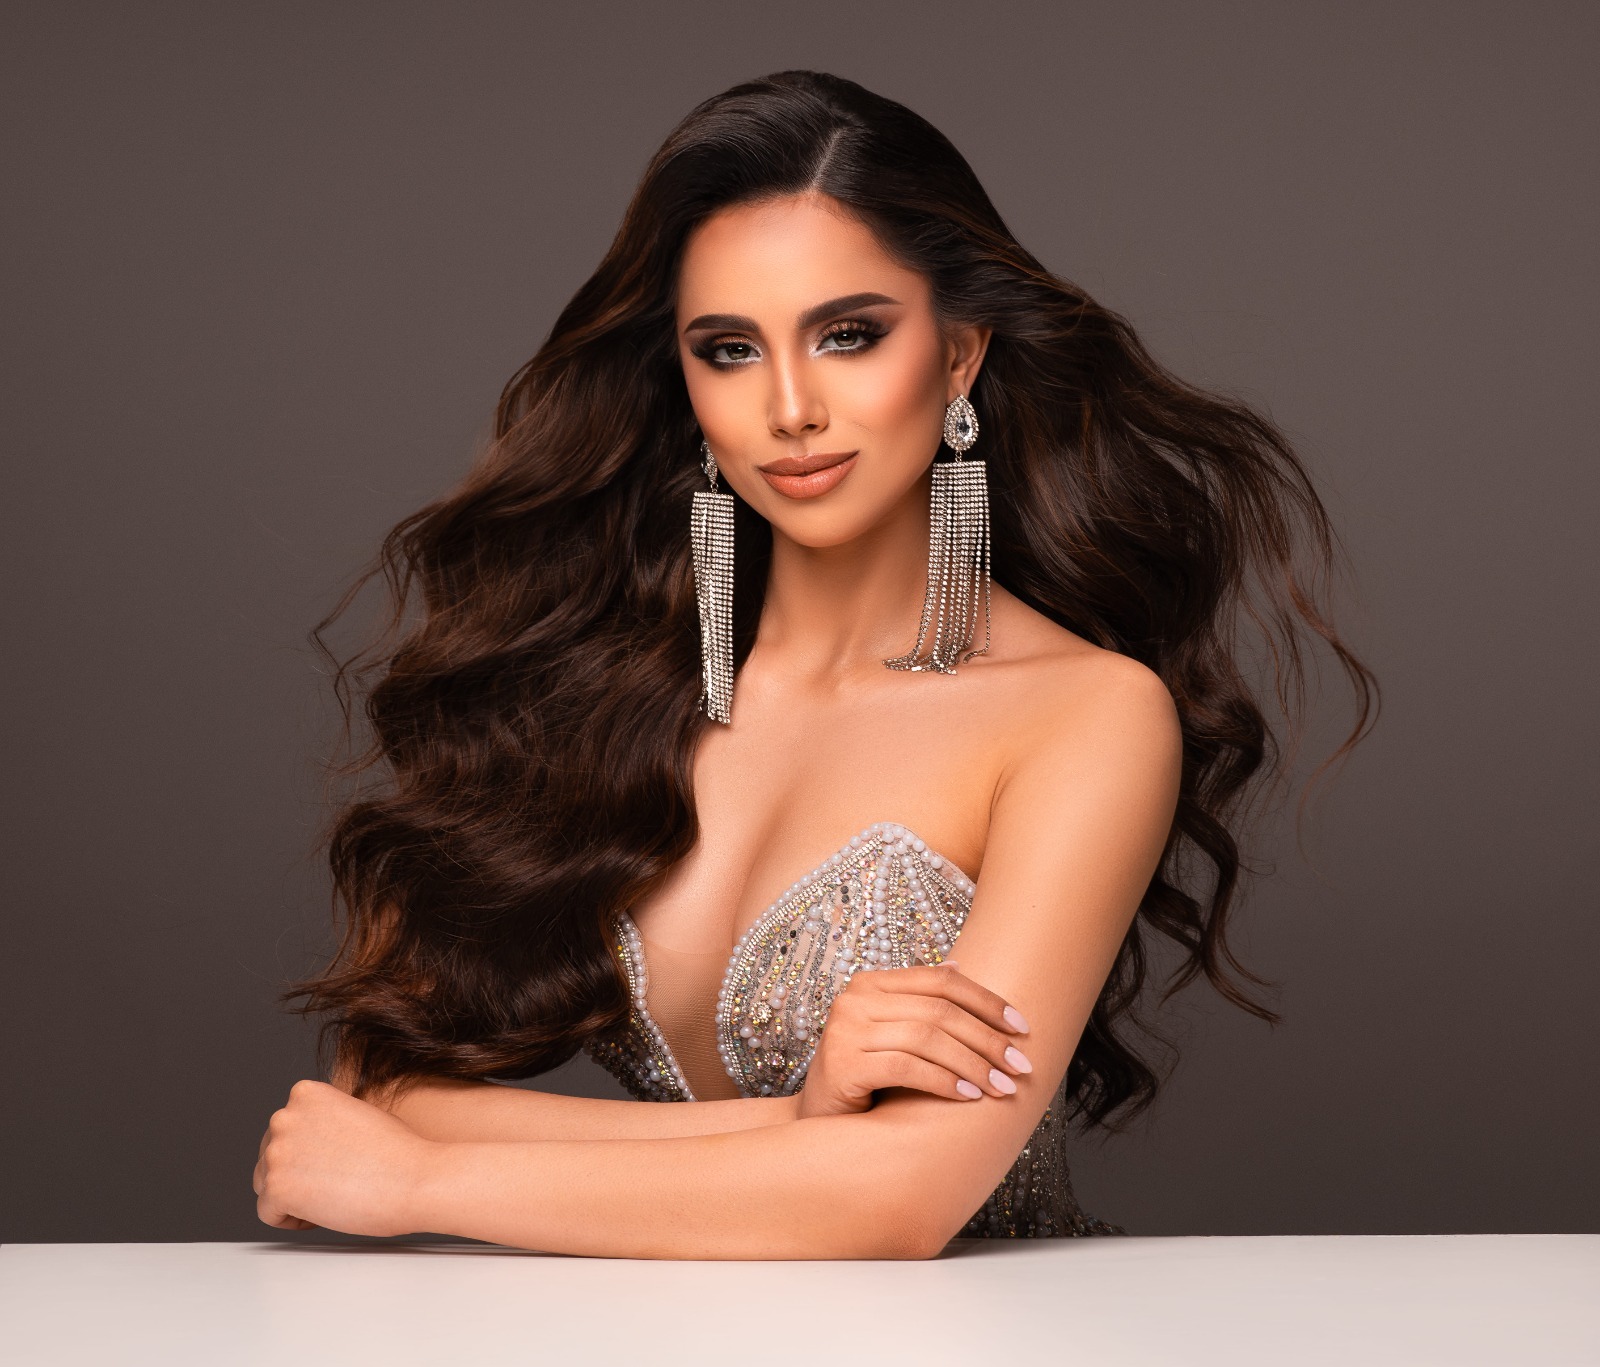 Denmark’s Victoria Larsen is Ready to Shine at Miss Supranational